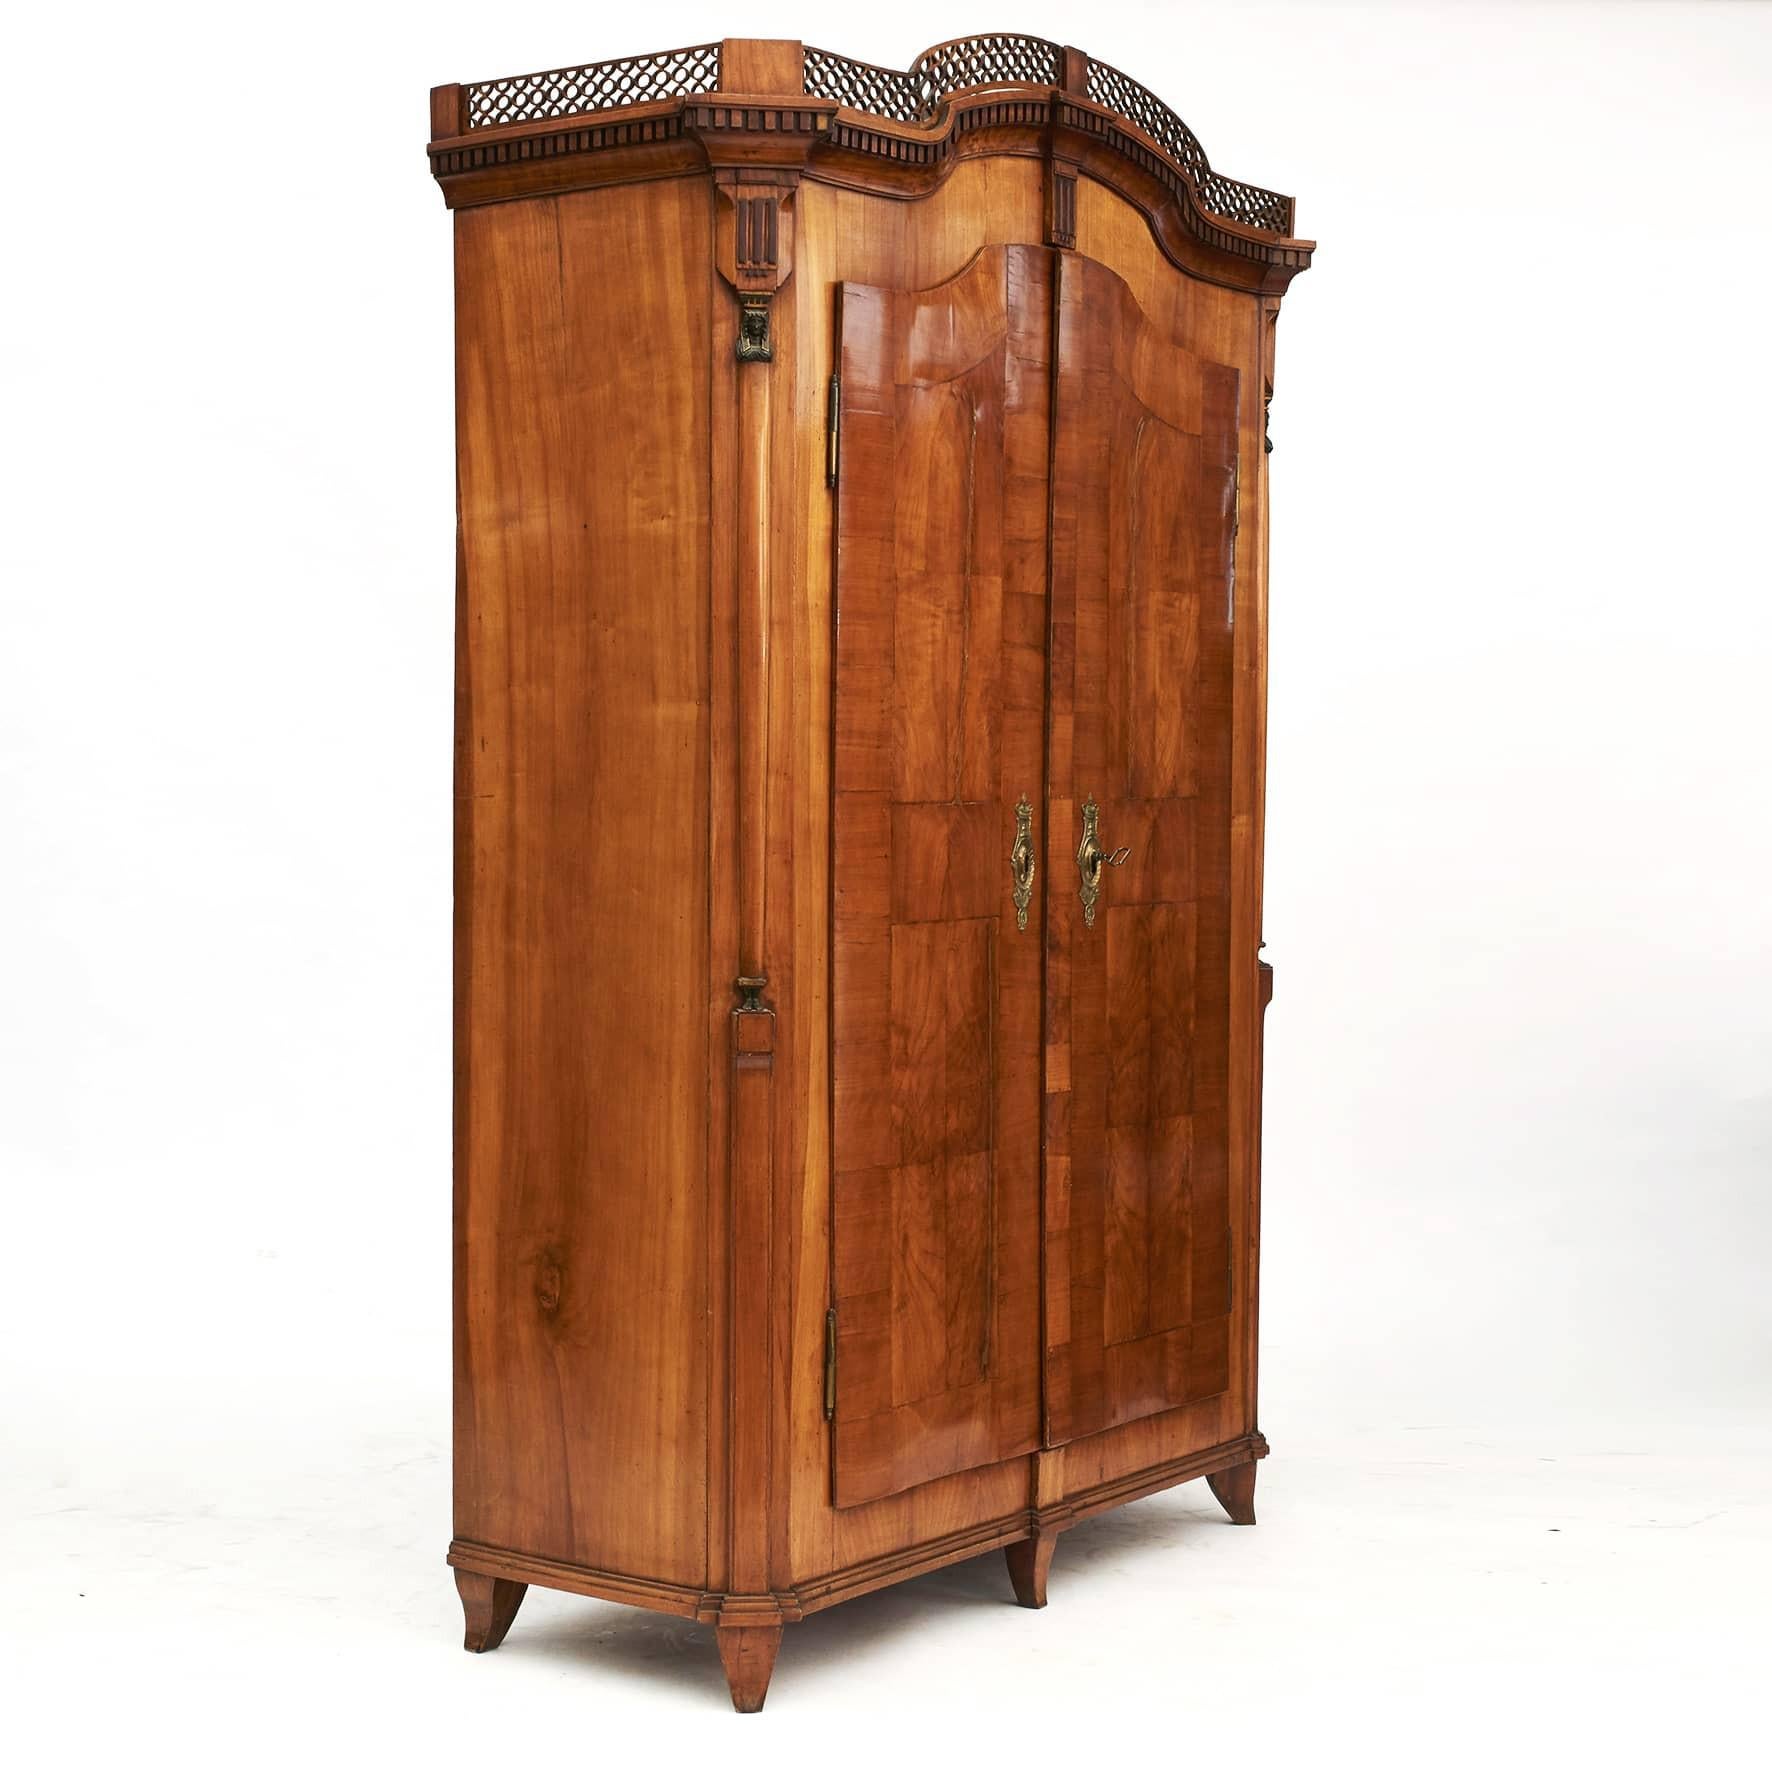 The two-door armoire or wardrobe has a cherry wood veneer with walnut fluting. Pierce-carved crown with dentil molding. Canted corners adorned with emerald green Egyptian caryatid pilasters with gold details. Doors with original fittings, key and